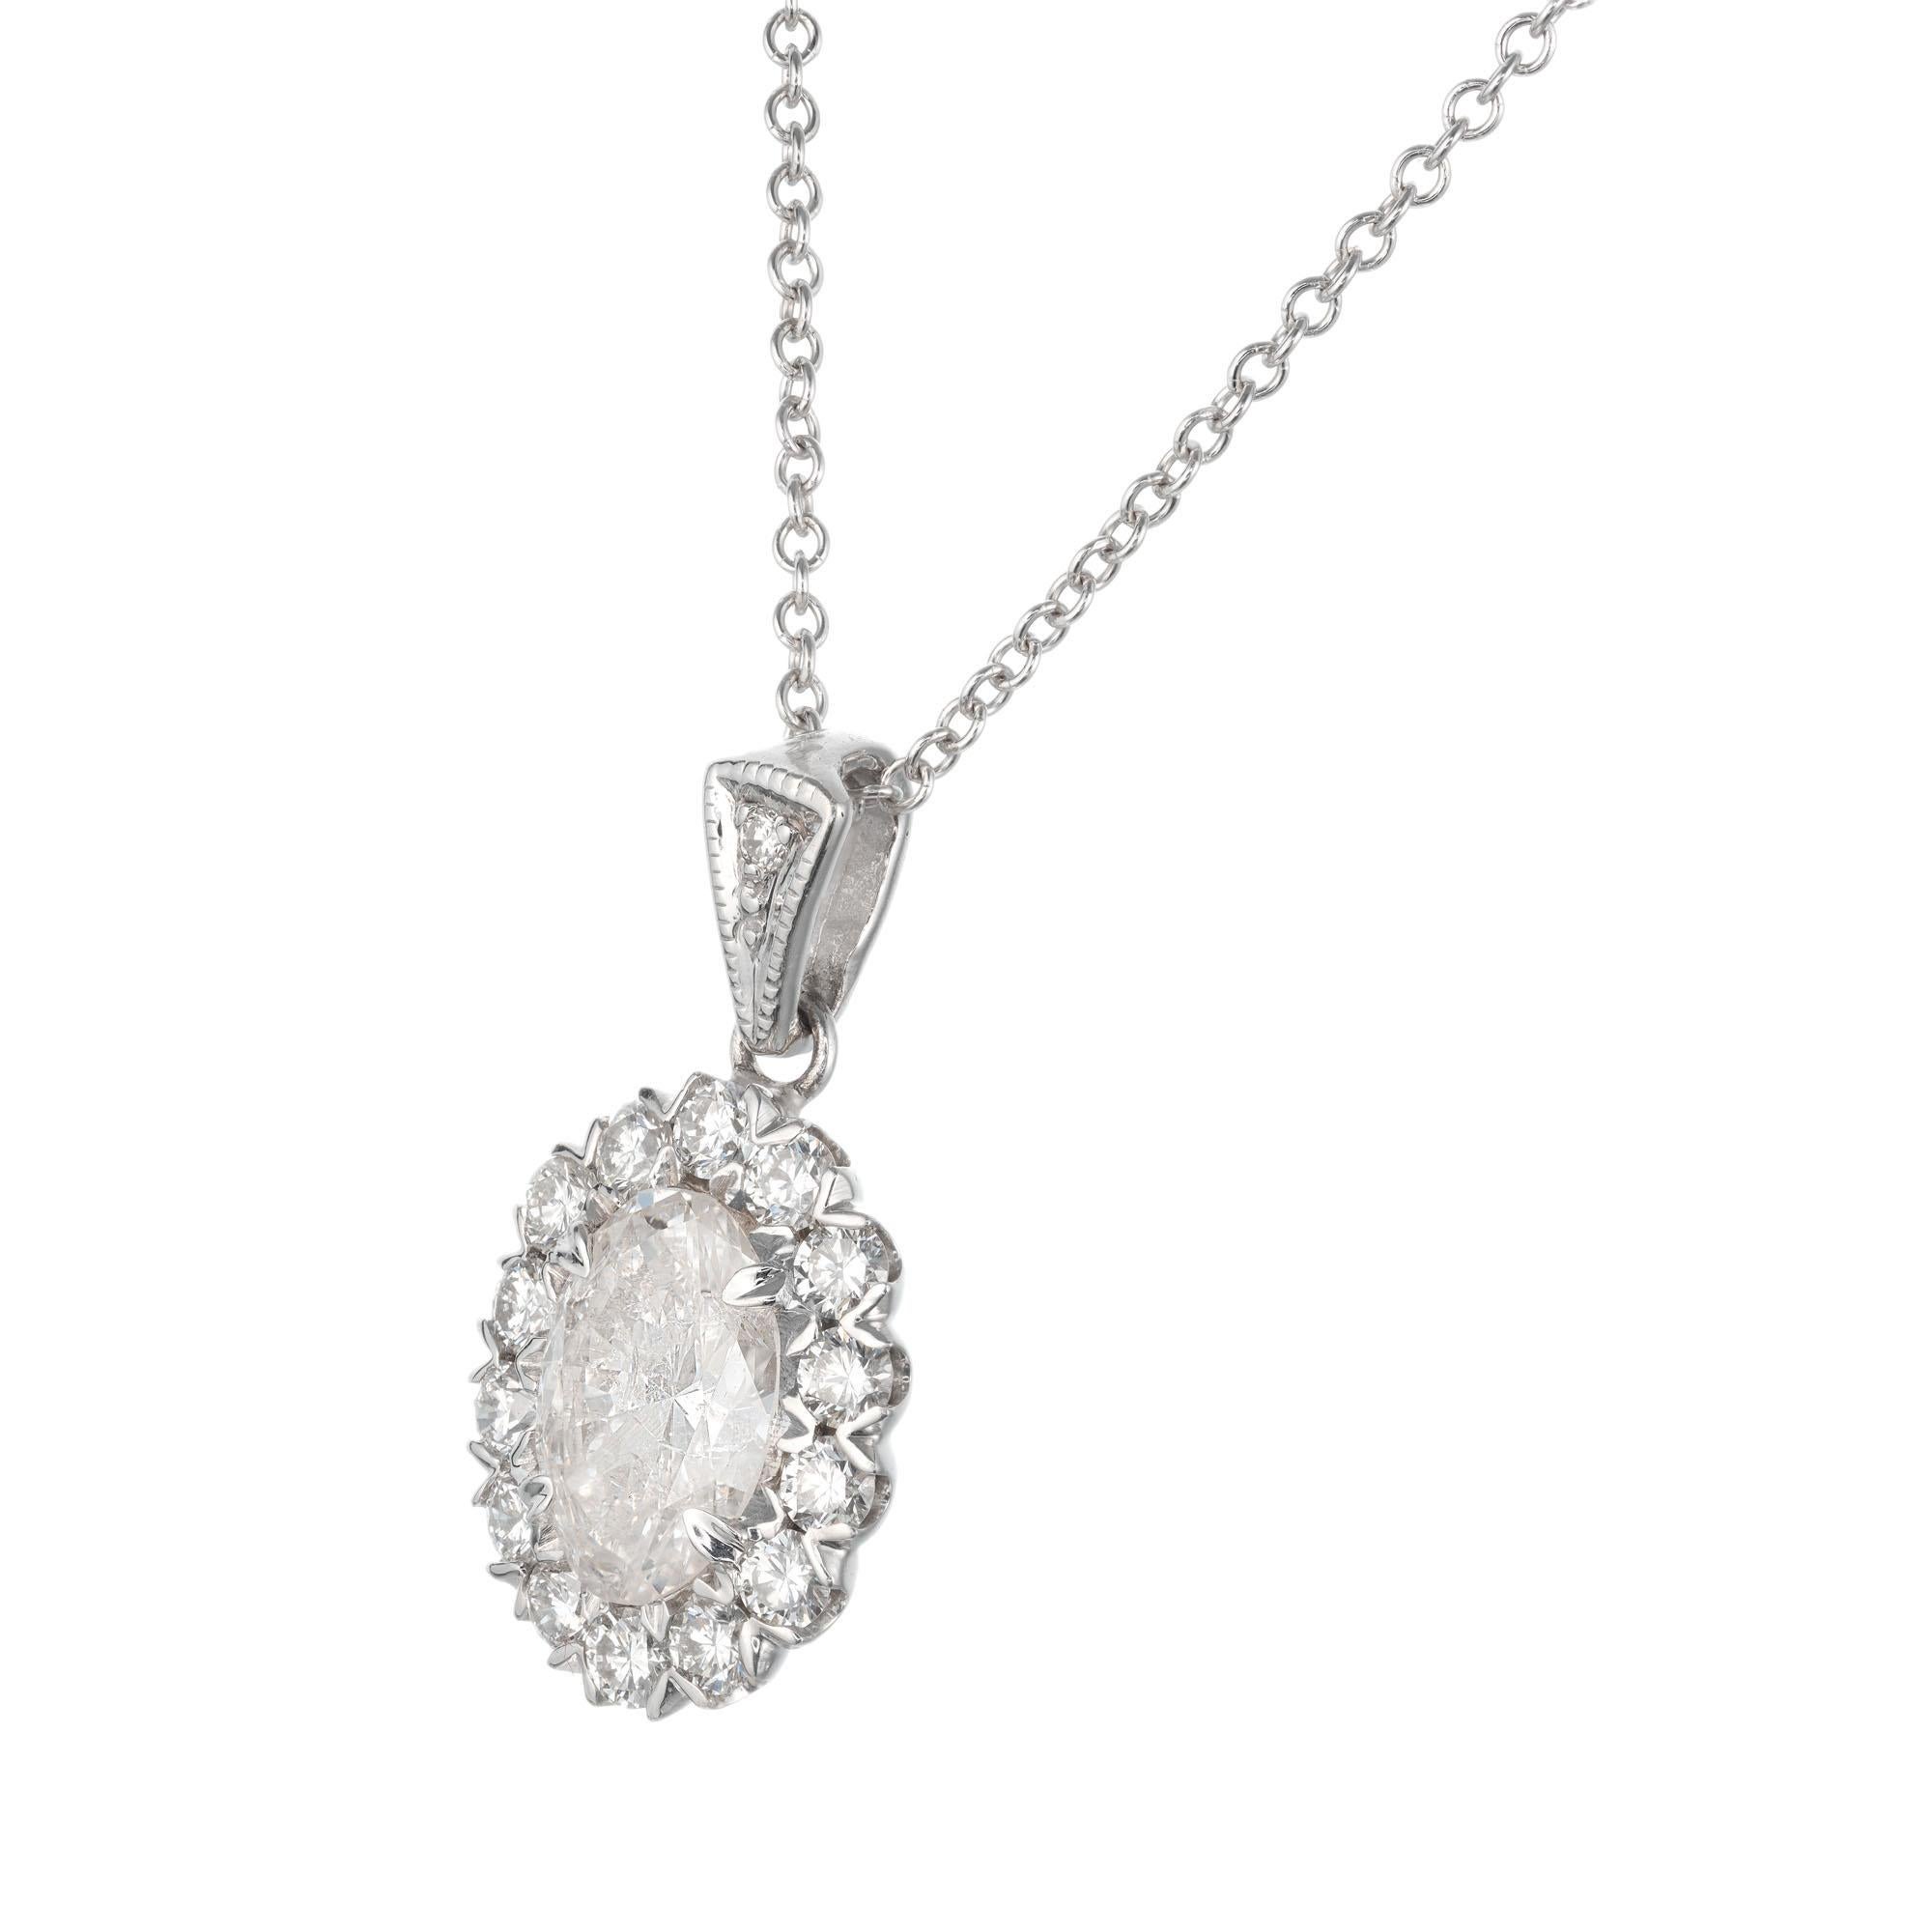 Oval diamond pendant necklace. EGL center stone with a halo of 15 round diamonds in 18k white gold, on a 18 inch white gold chain. Created in the Peter Suchy Warehouse. 

1 EGL certified oval diamond approx. total weight .77cts, G-H, I1, 7.60 x 5.30